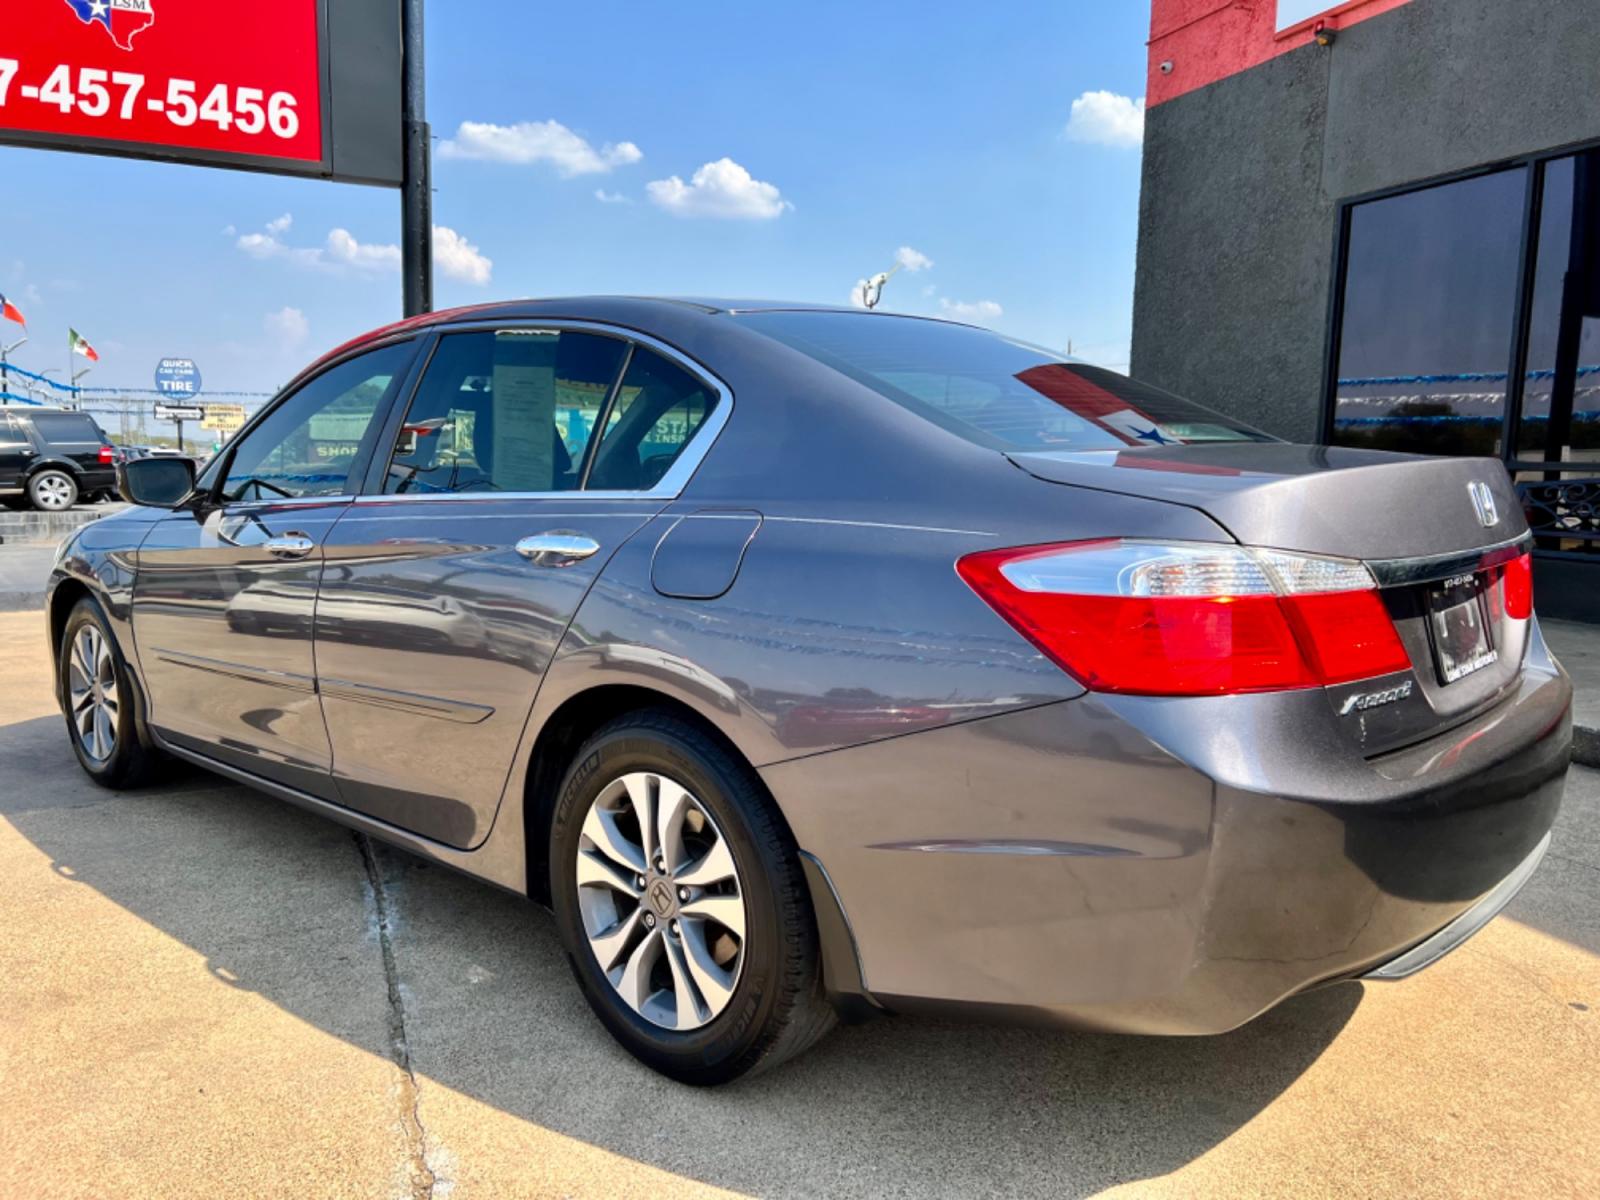 2015 SILVER HONDA ACCORD (1HGCR2F36FA) , located at 5900 E. Lancaster Ave., Fort Worth, TX, 76112, (817) 457-5456, 0.000000, 0.000000 - This is a 2015 HONDA ACCORD 4 DOOR SEDAN that is in excellent condition. There are no dents or scratches. The interior is clean with no rips or tears or stains. All power windows, door locks and seats. Ice cold AC for those hot Texas summer days. It is equipped with a CD player, AM/FM radio, AUX por - Photo #4